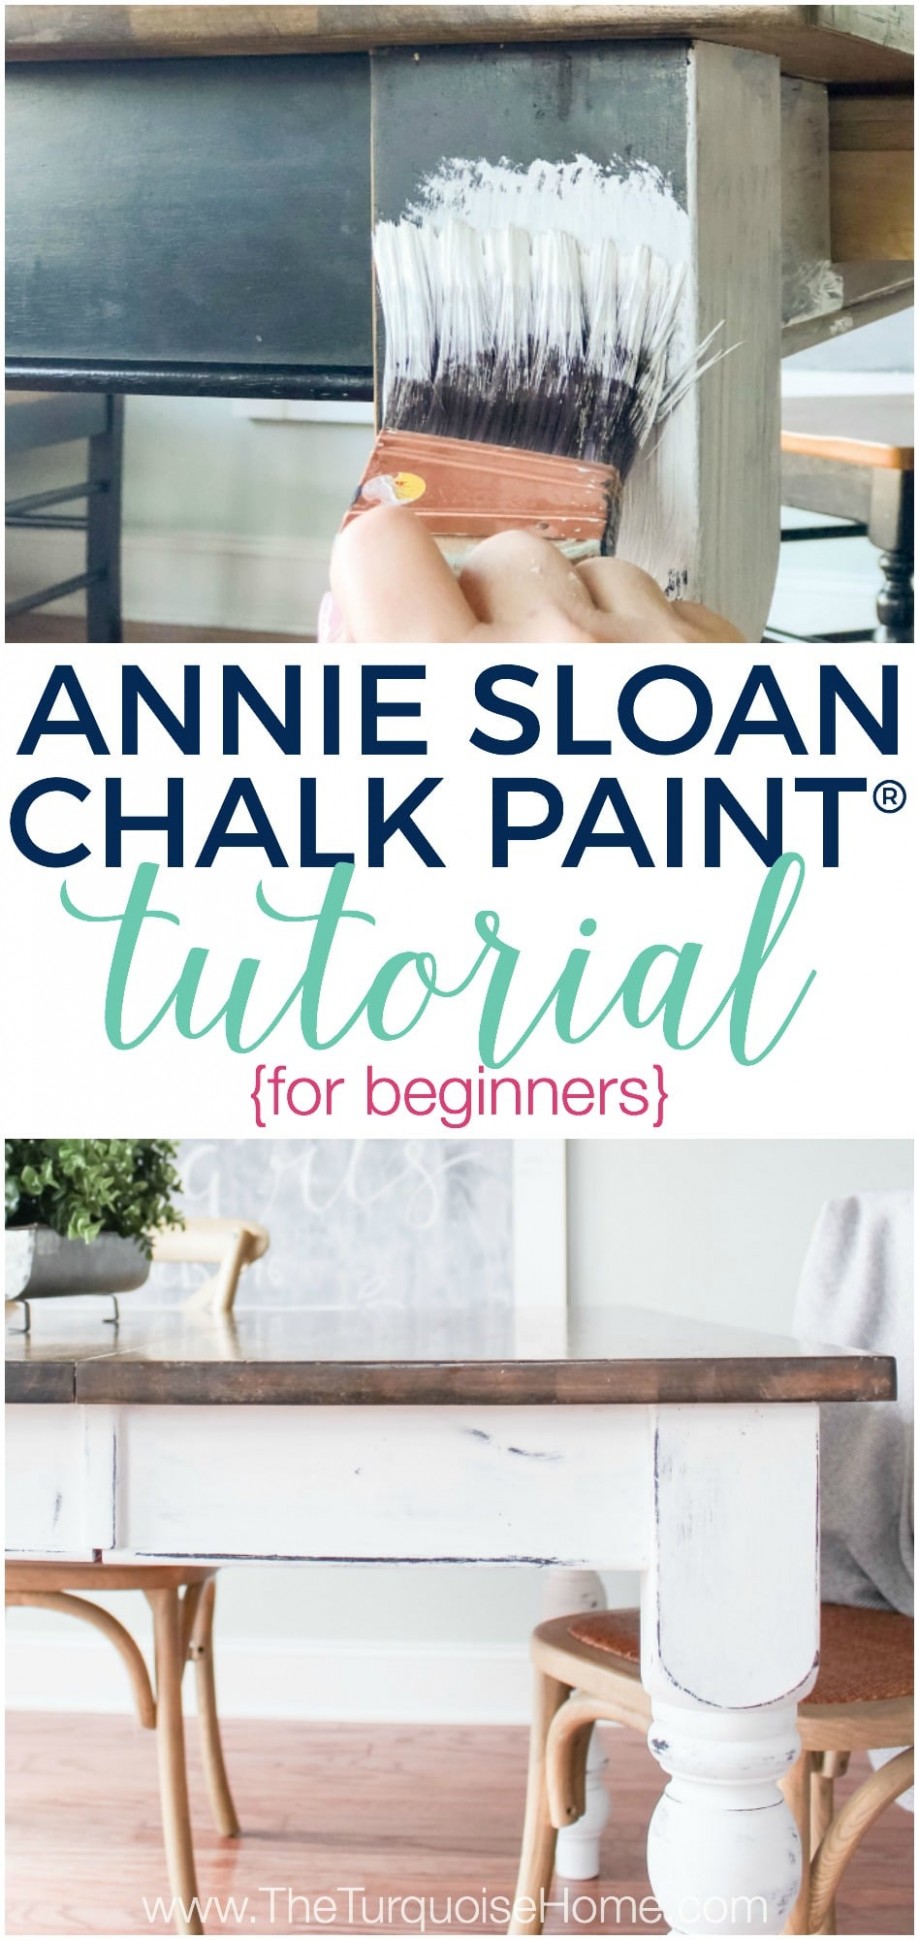 How To Use Annie Sloan Chalk Paint (perfect For Beginners!) Where Do I Buy Annie Sloan Chalk Paint